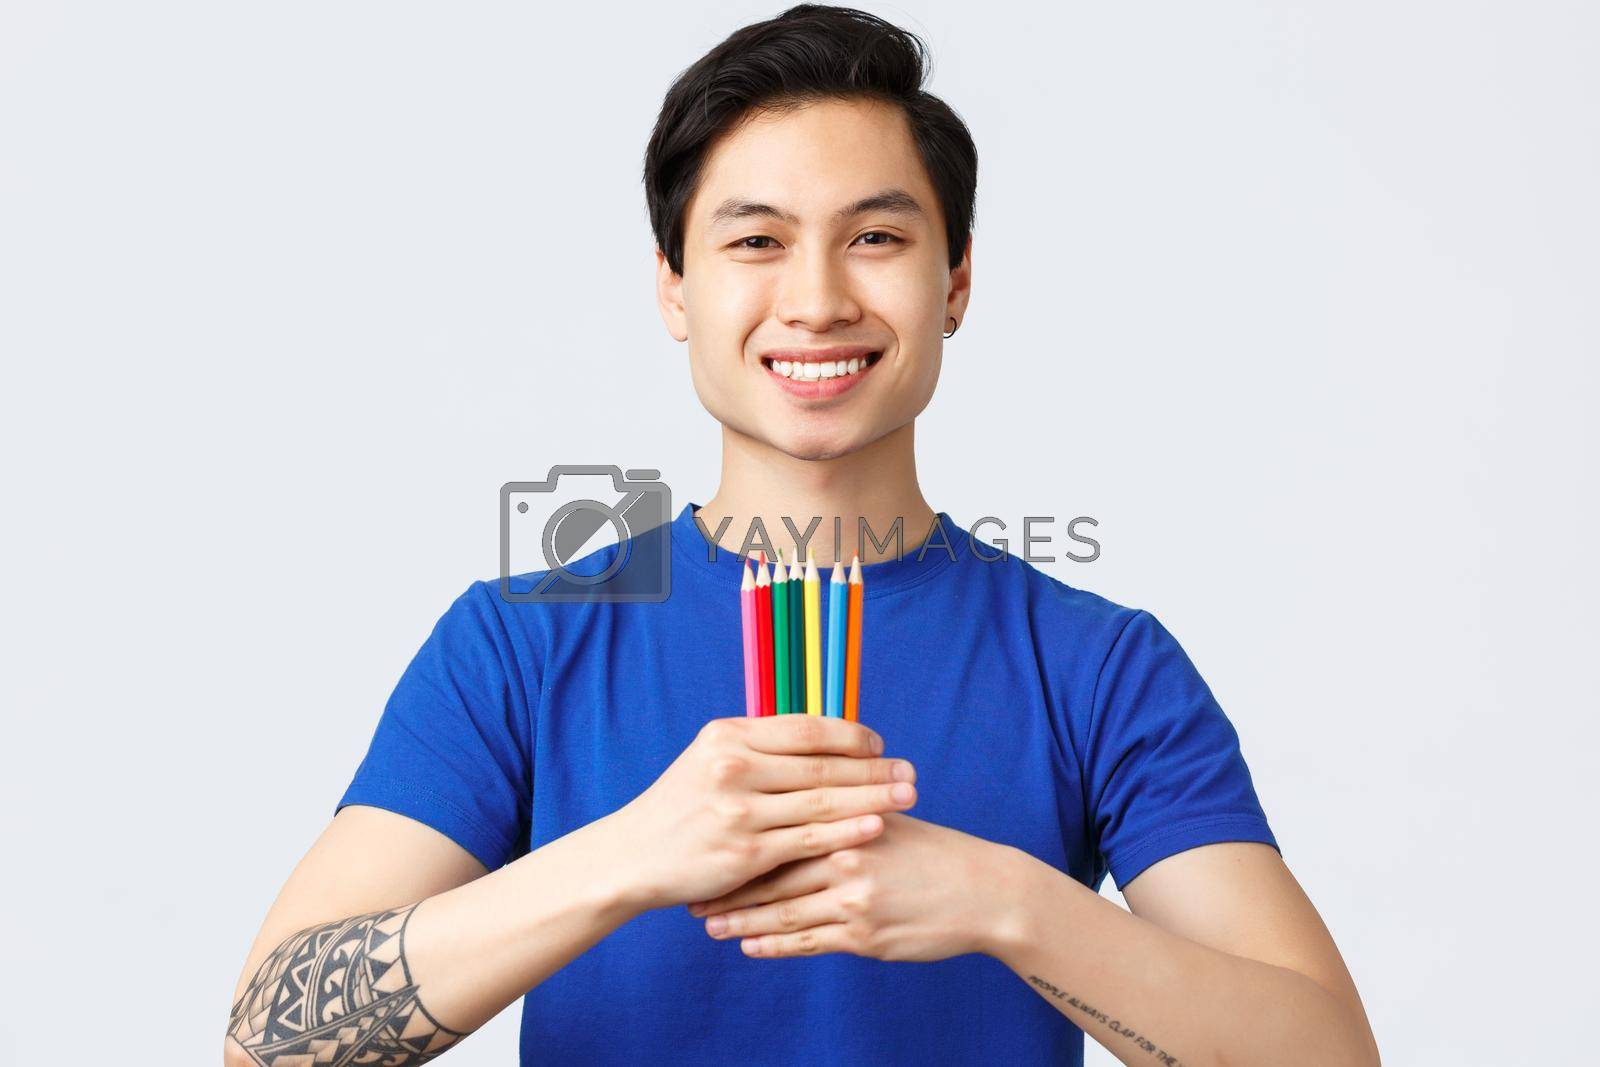 Self-quarantine, social distancine, leisure and lifestyle concept. Young handsome asian man with tattoo show colored pencils, found new hobby feeling happy, smiling at camera.